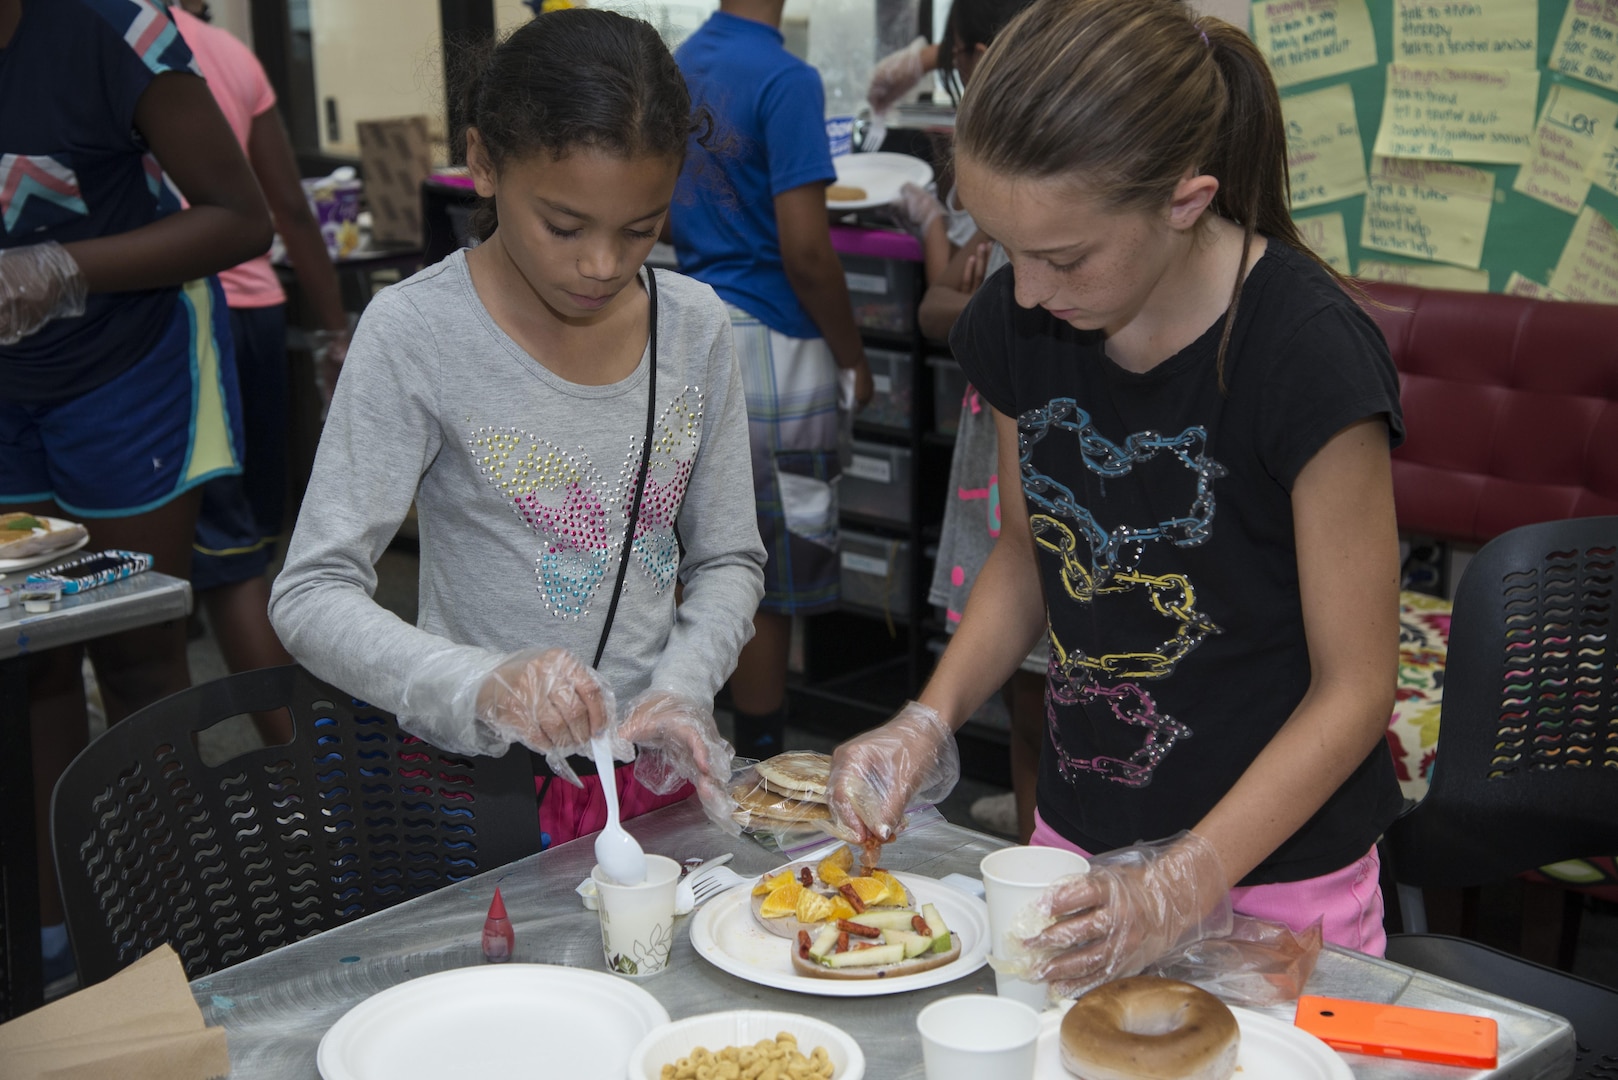 Sofia Jackson  and Cheyenne Gramlick  prepare their dish, “spicy-yummy-breakfast”, for an “Iron Chef” cooking contest July 9, 2015 at the Joint Base San Antonio-Randolph Youth Center. More than 500 children are involved in activities and programs provided by Randolph Youth Programs each year. (U.S. Air Force photo by Airman 1st Class Stormy Archer/Released)